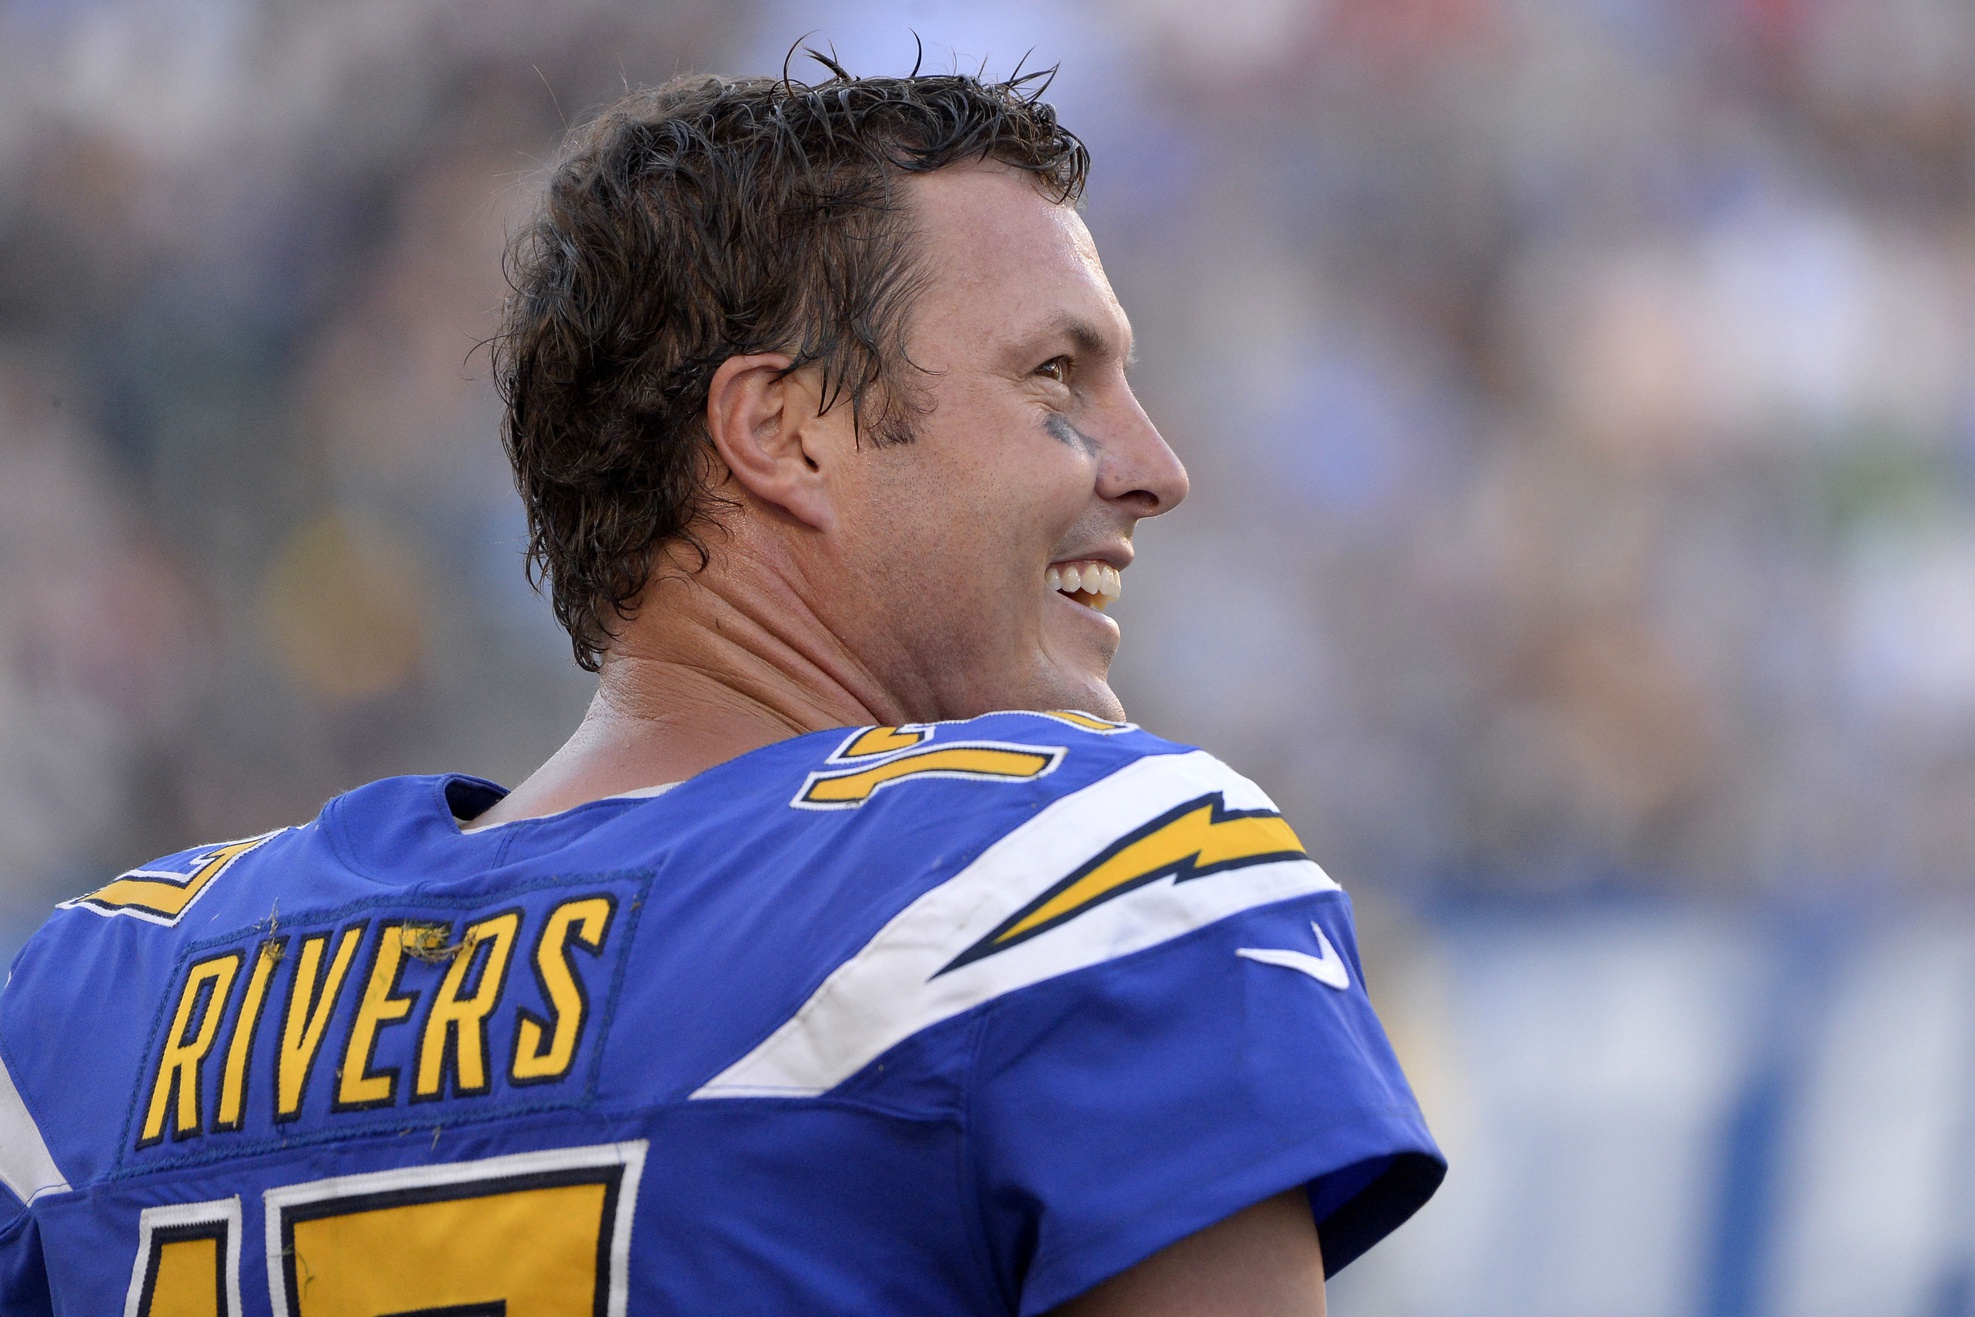 Philip Rivers, heading into final year of contract, skips start of Chargers offseason1975 x 1317